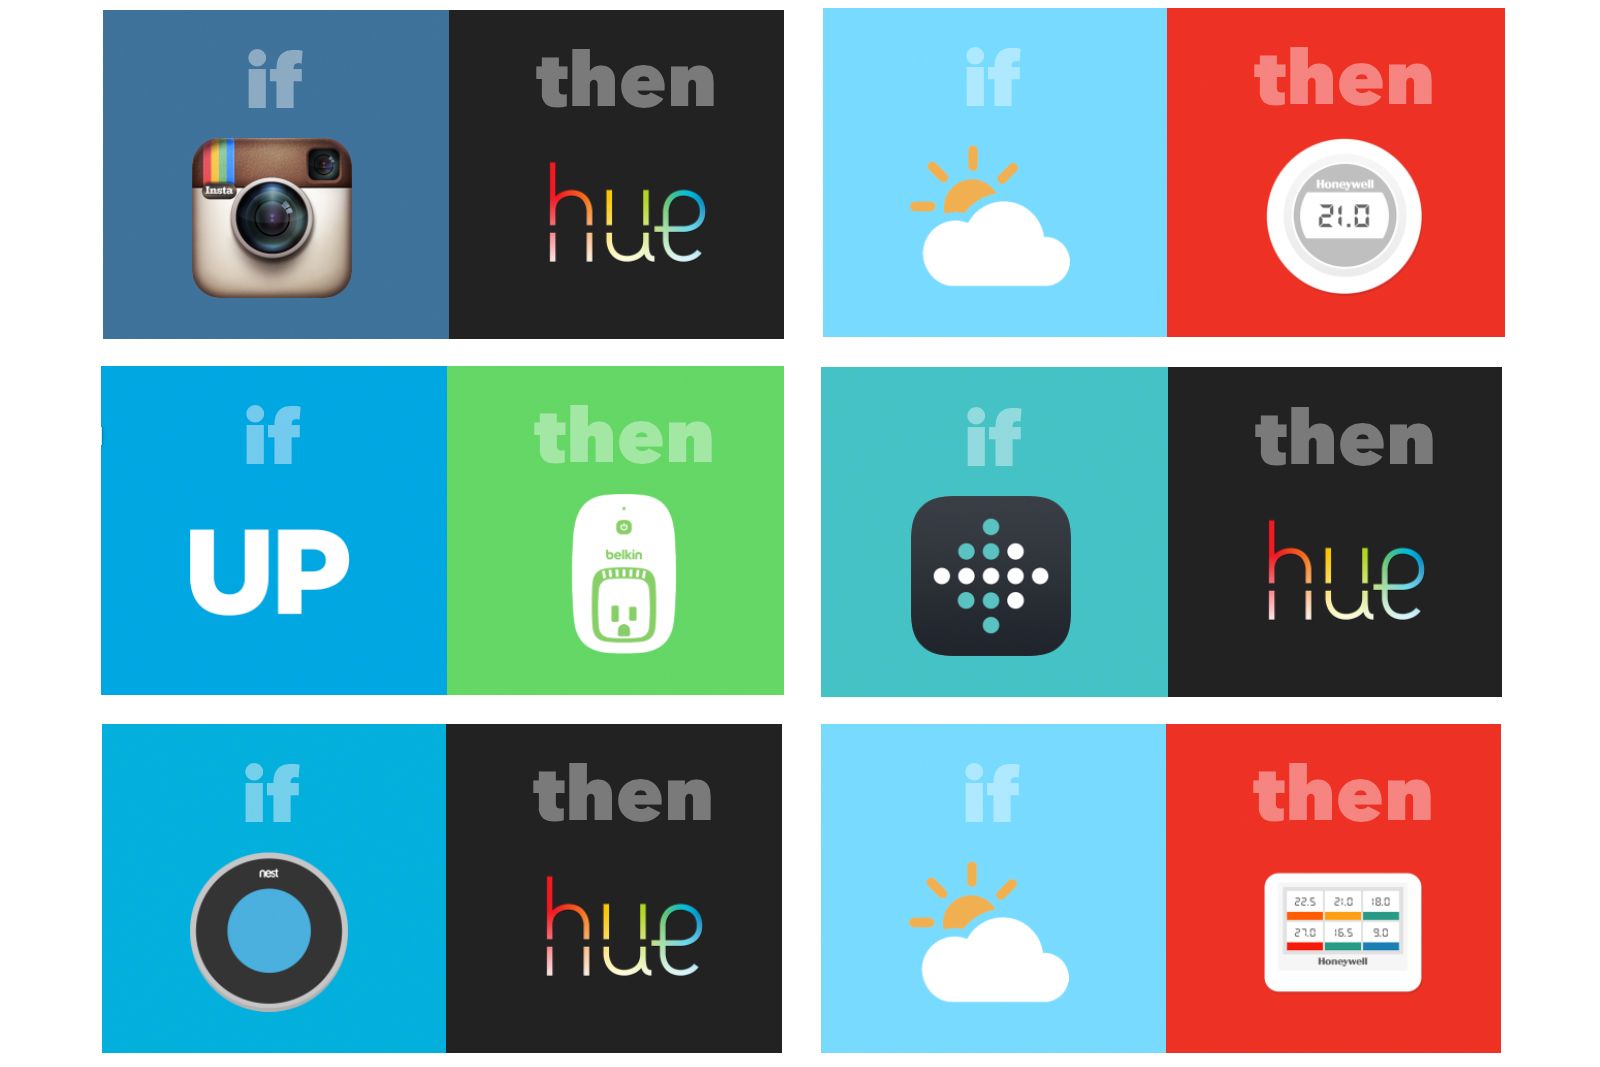 ten ifttt recipes that will make your life smarter and simpler at home image 1